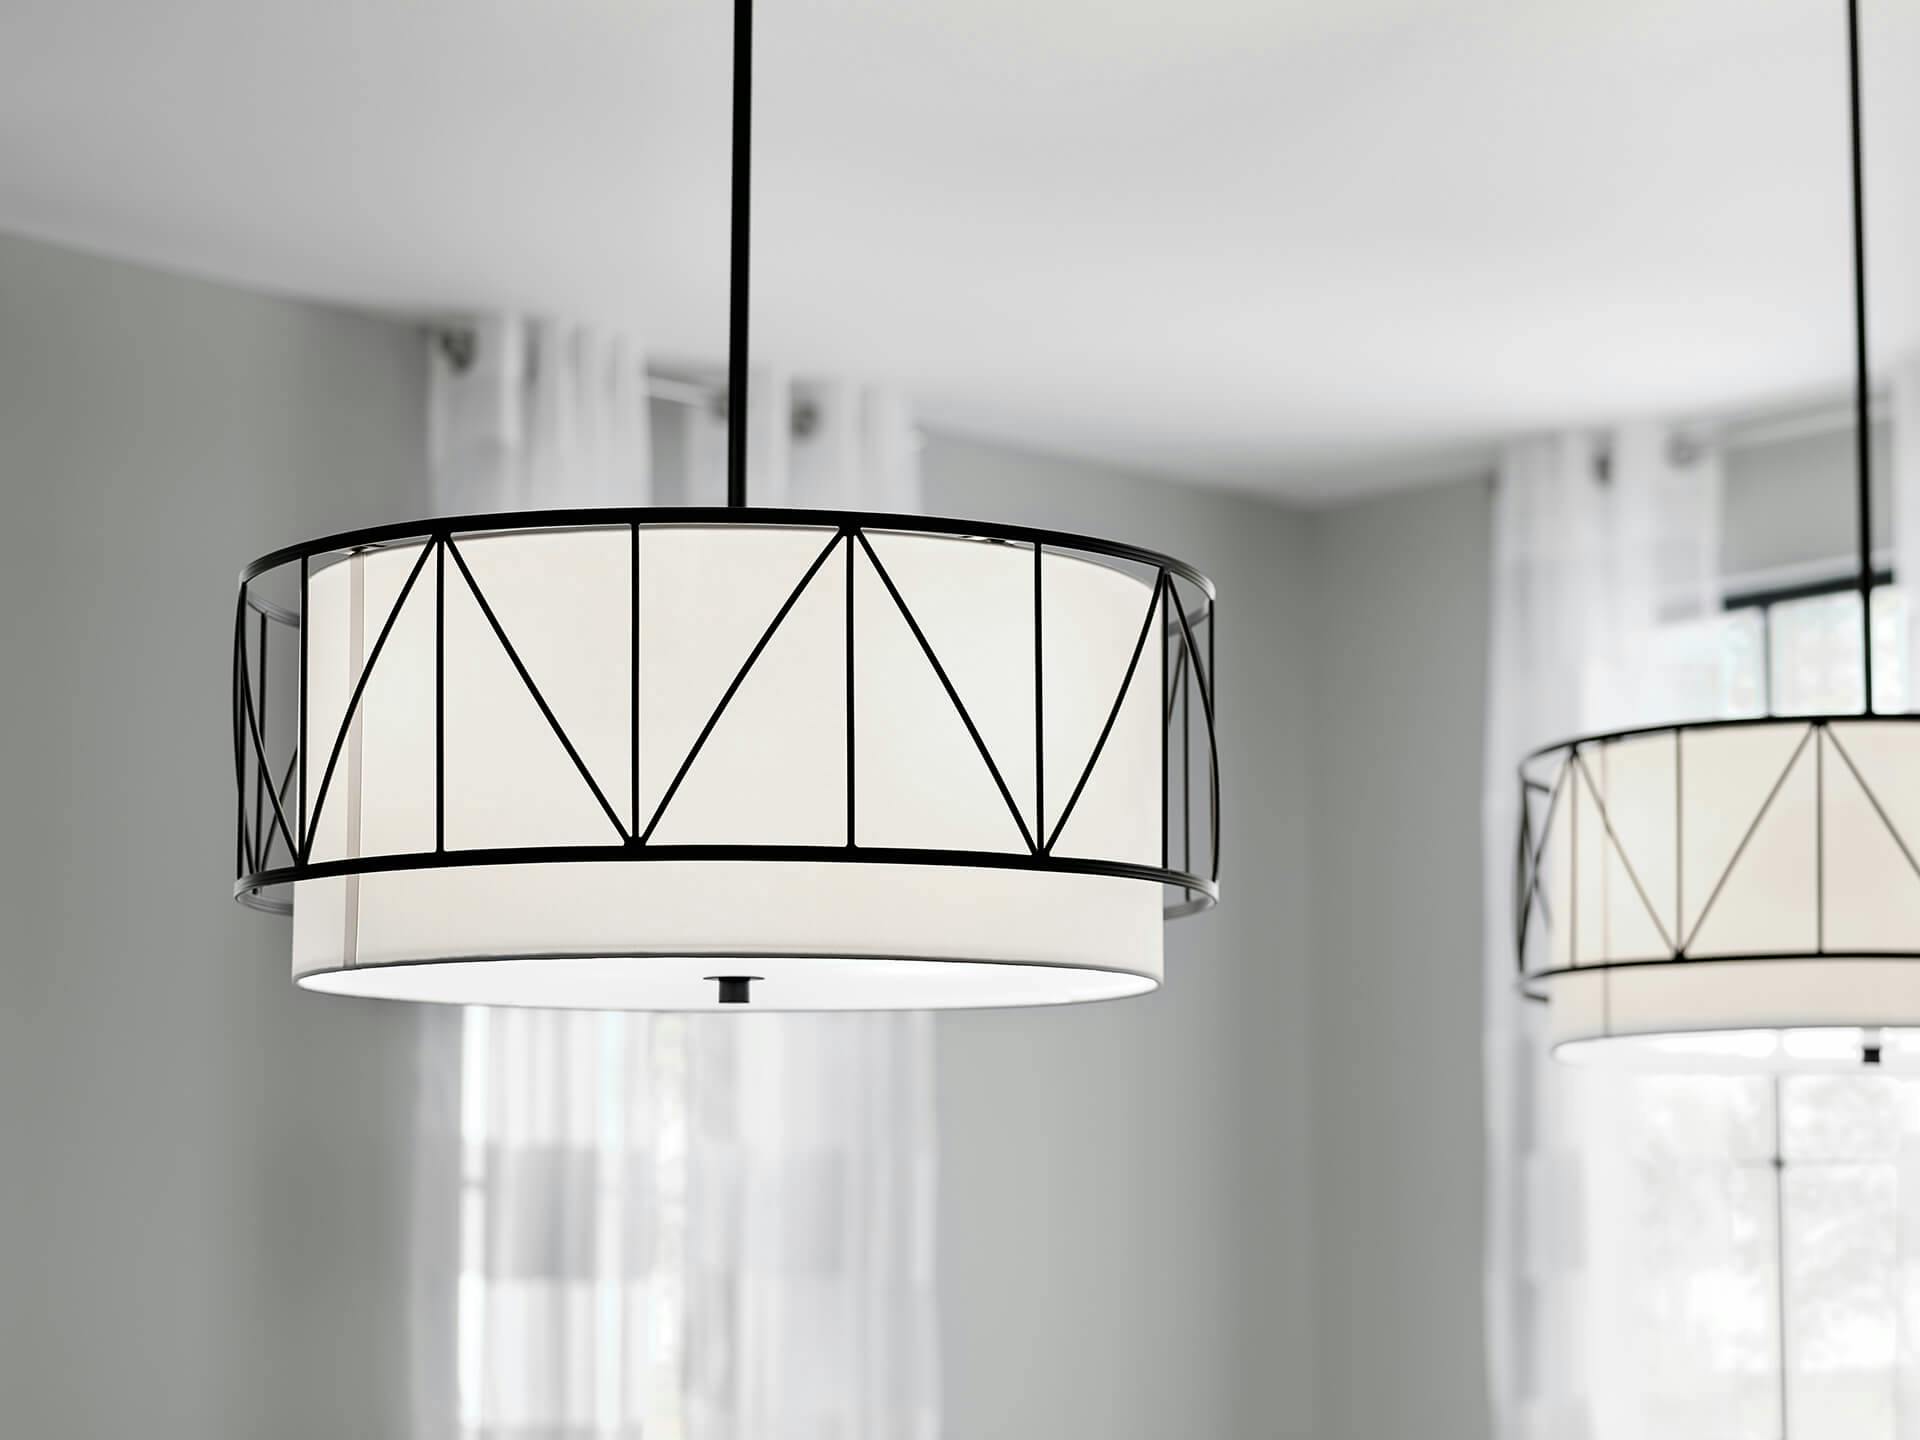 Two Birkleigh pendant lamps with black finish and white shades